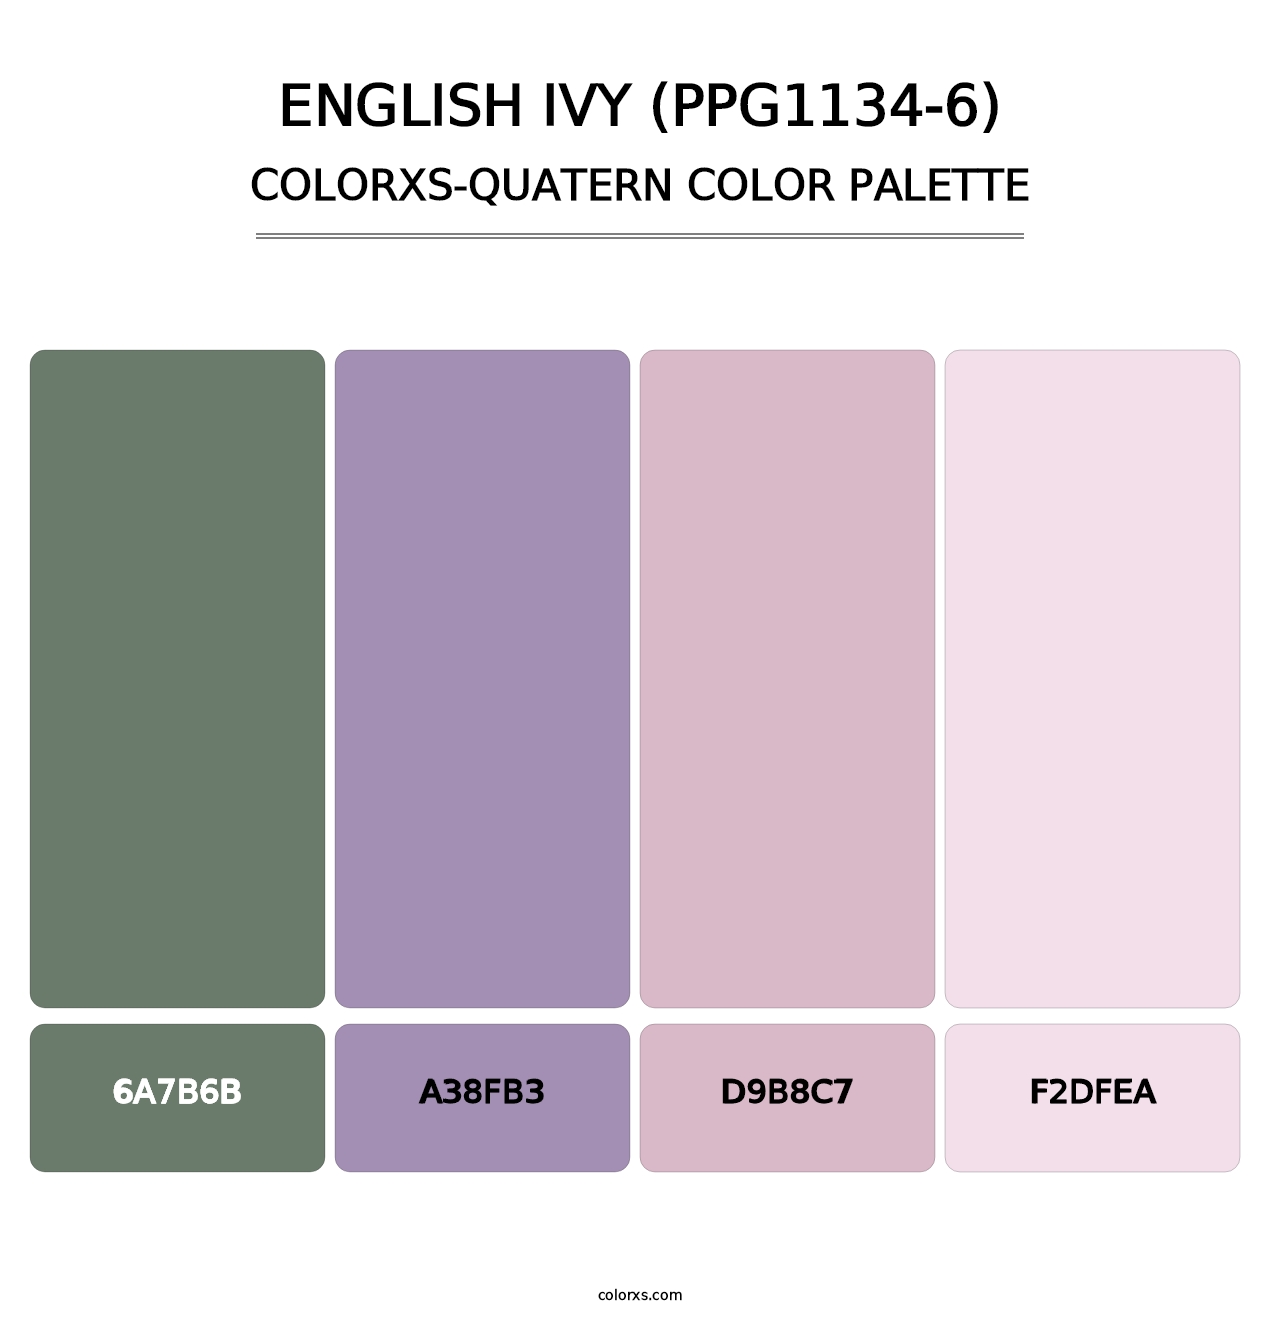 English Ivy (PPG1134-6) - Colorxs Quatern Palette